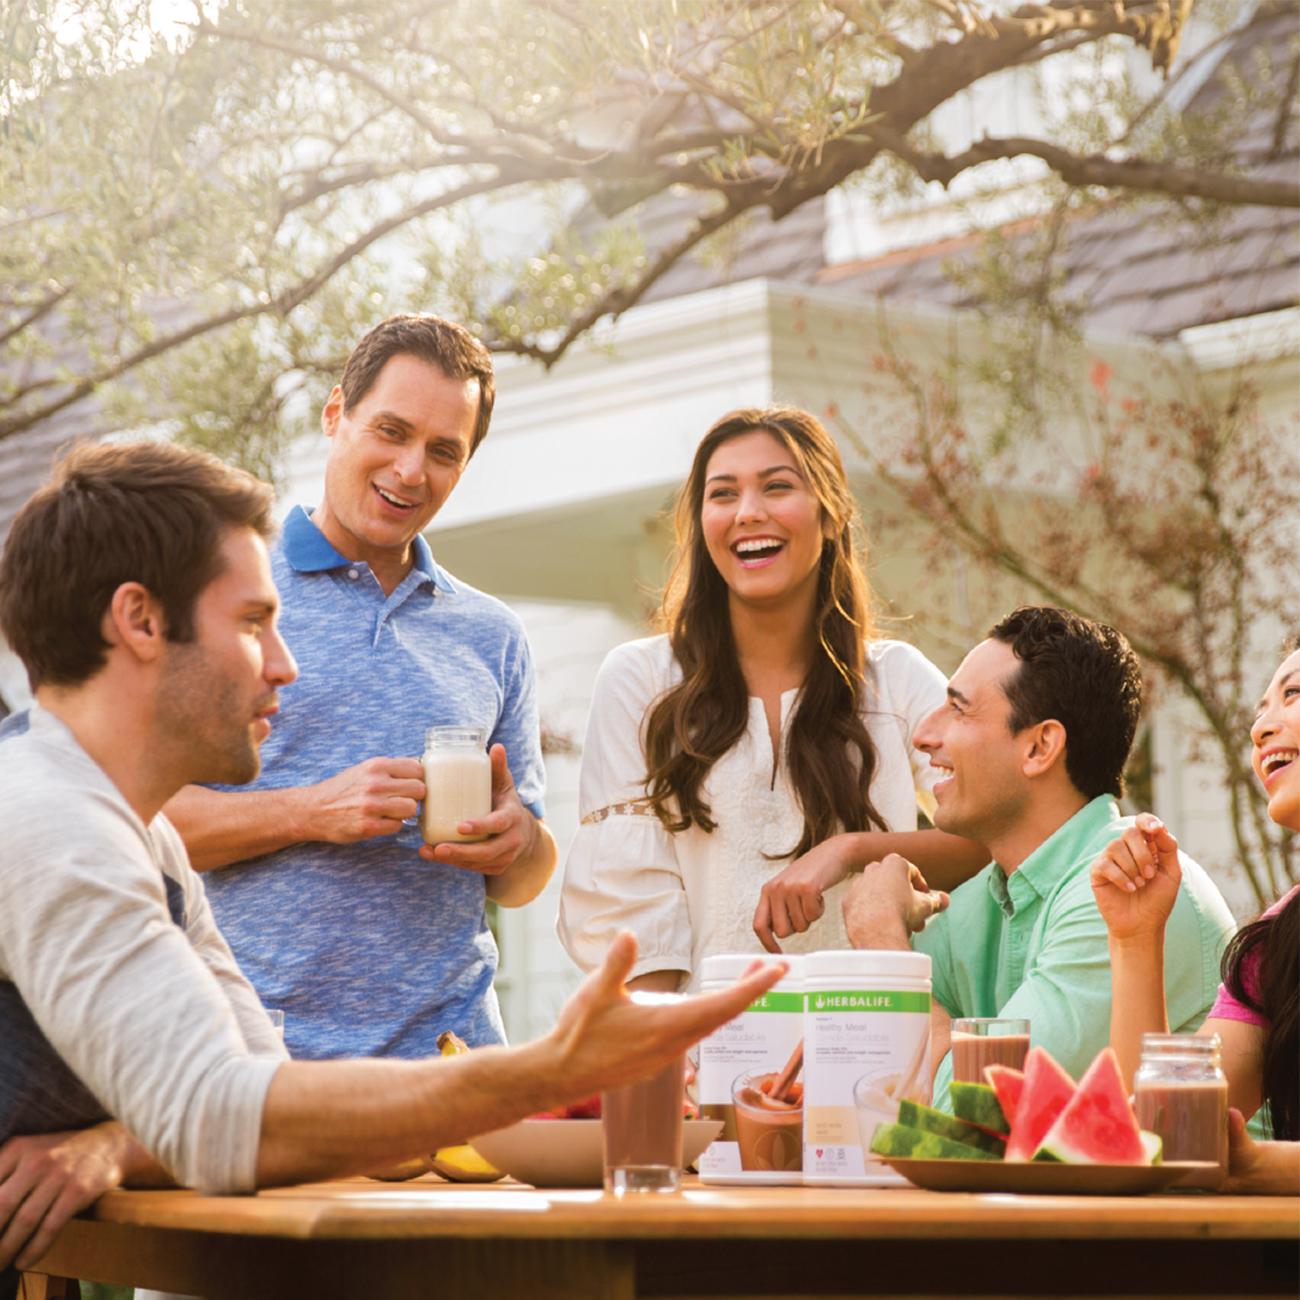 Image of People Consuming Herbalife Nutrition Products Outdoors